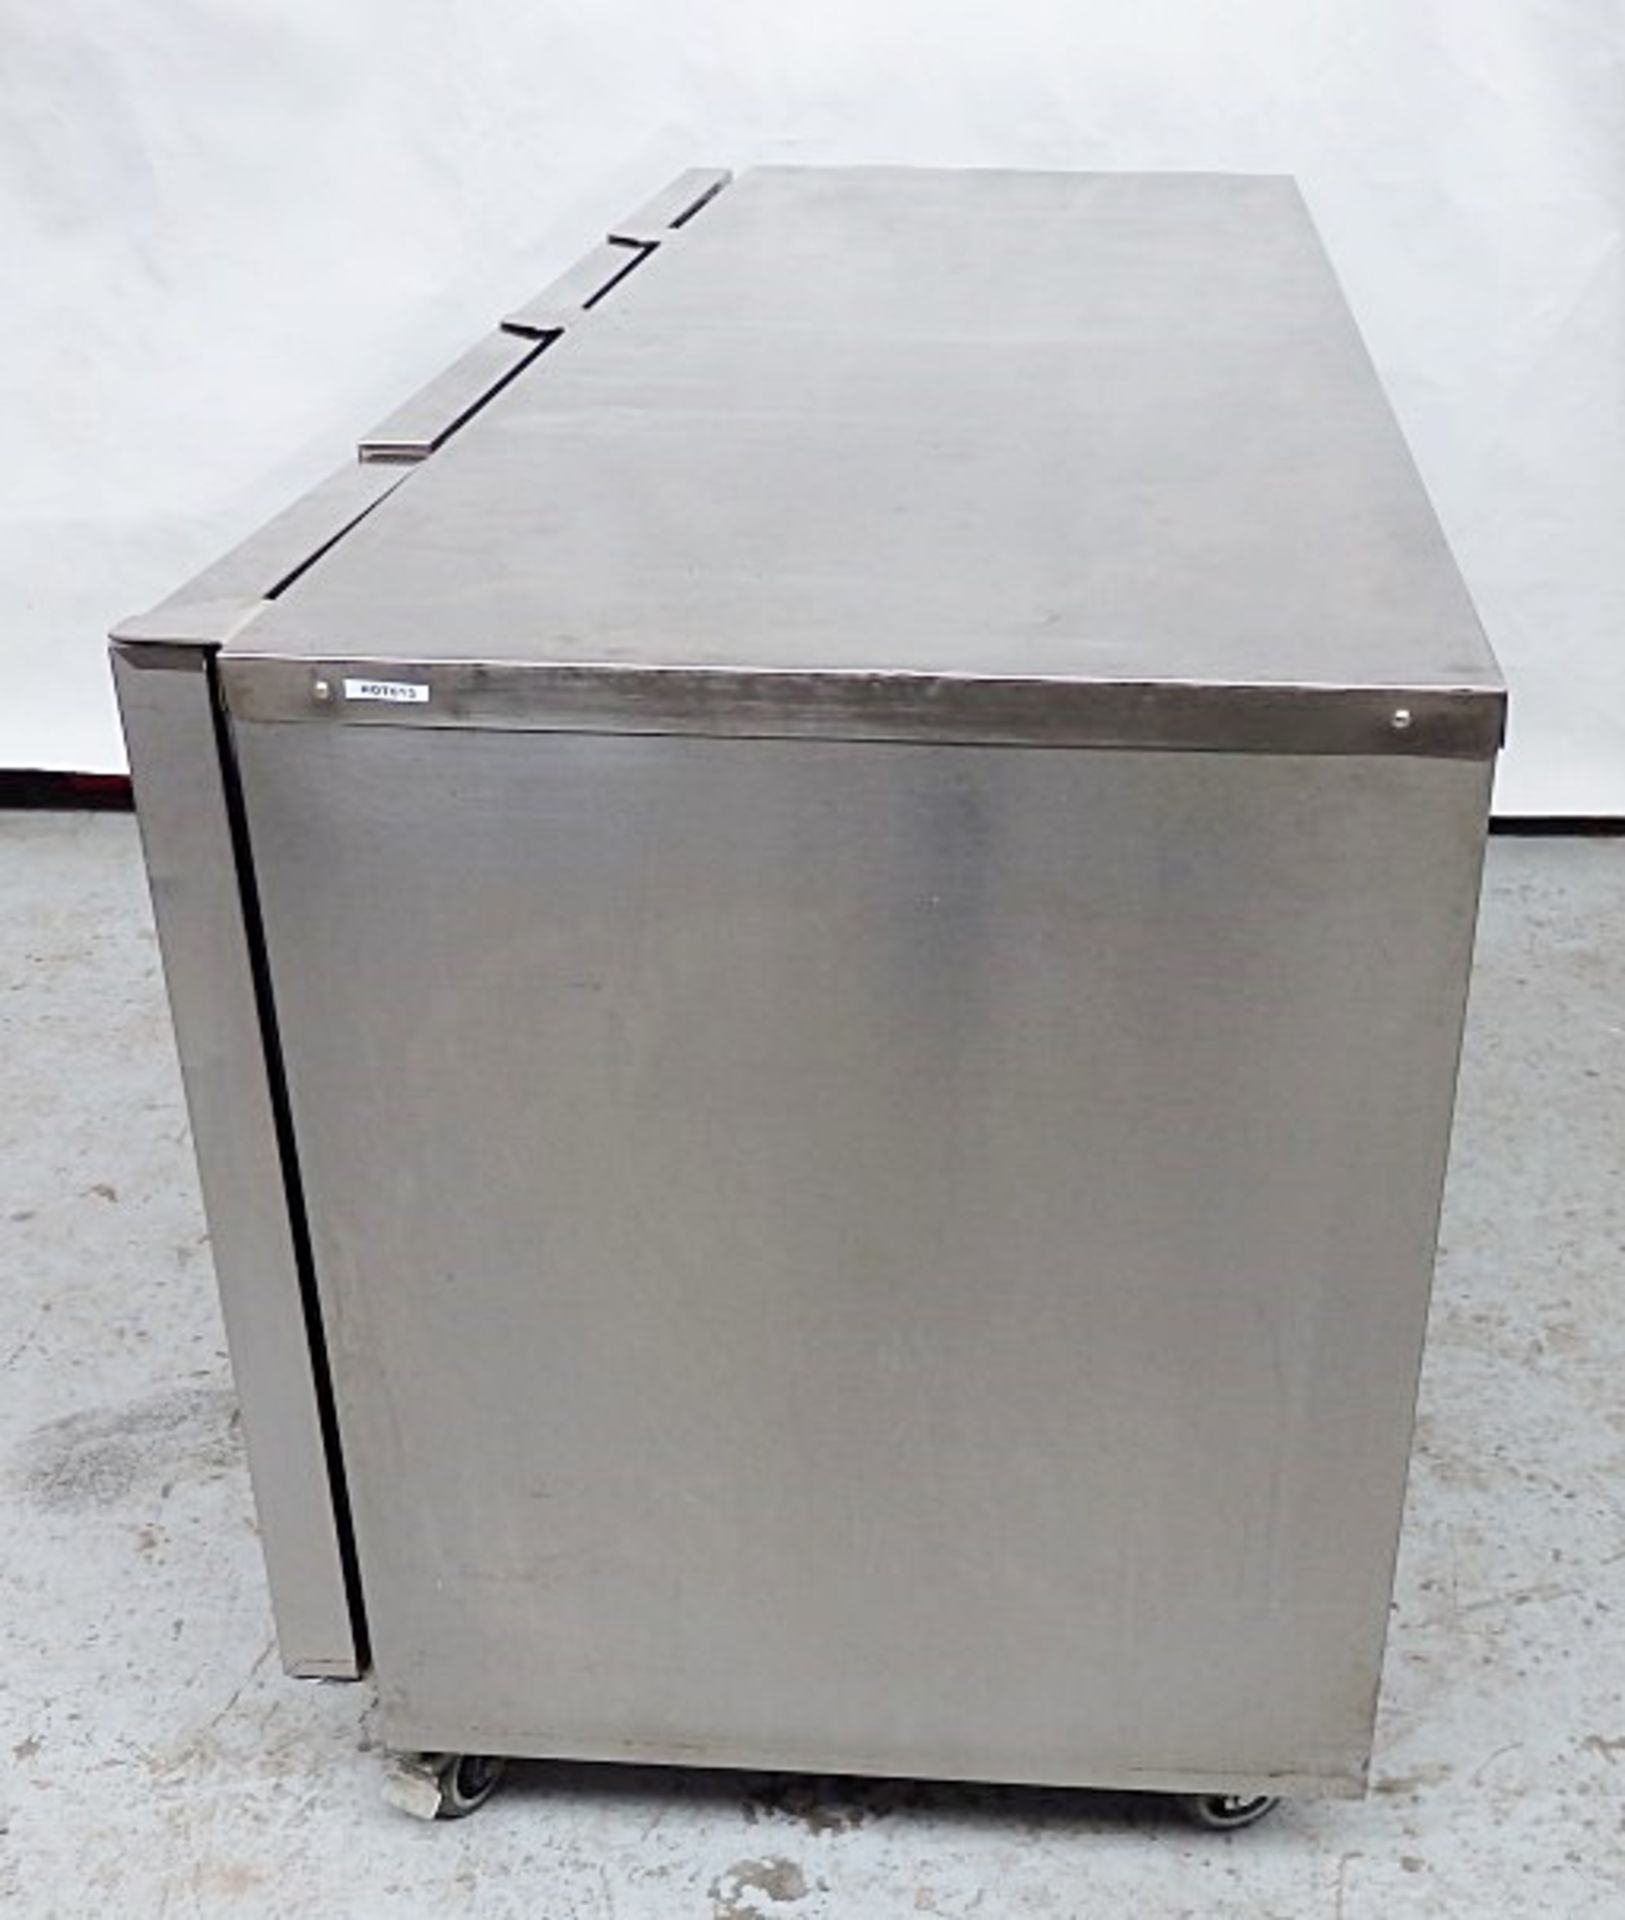 1 x FOSTER Commercial Undercounter Refrigerator With 3-Door Storage, Drawer And Stainless Steel - Image 7 of 13